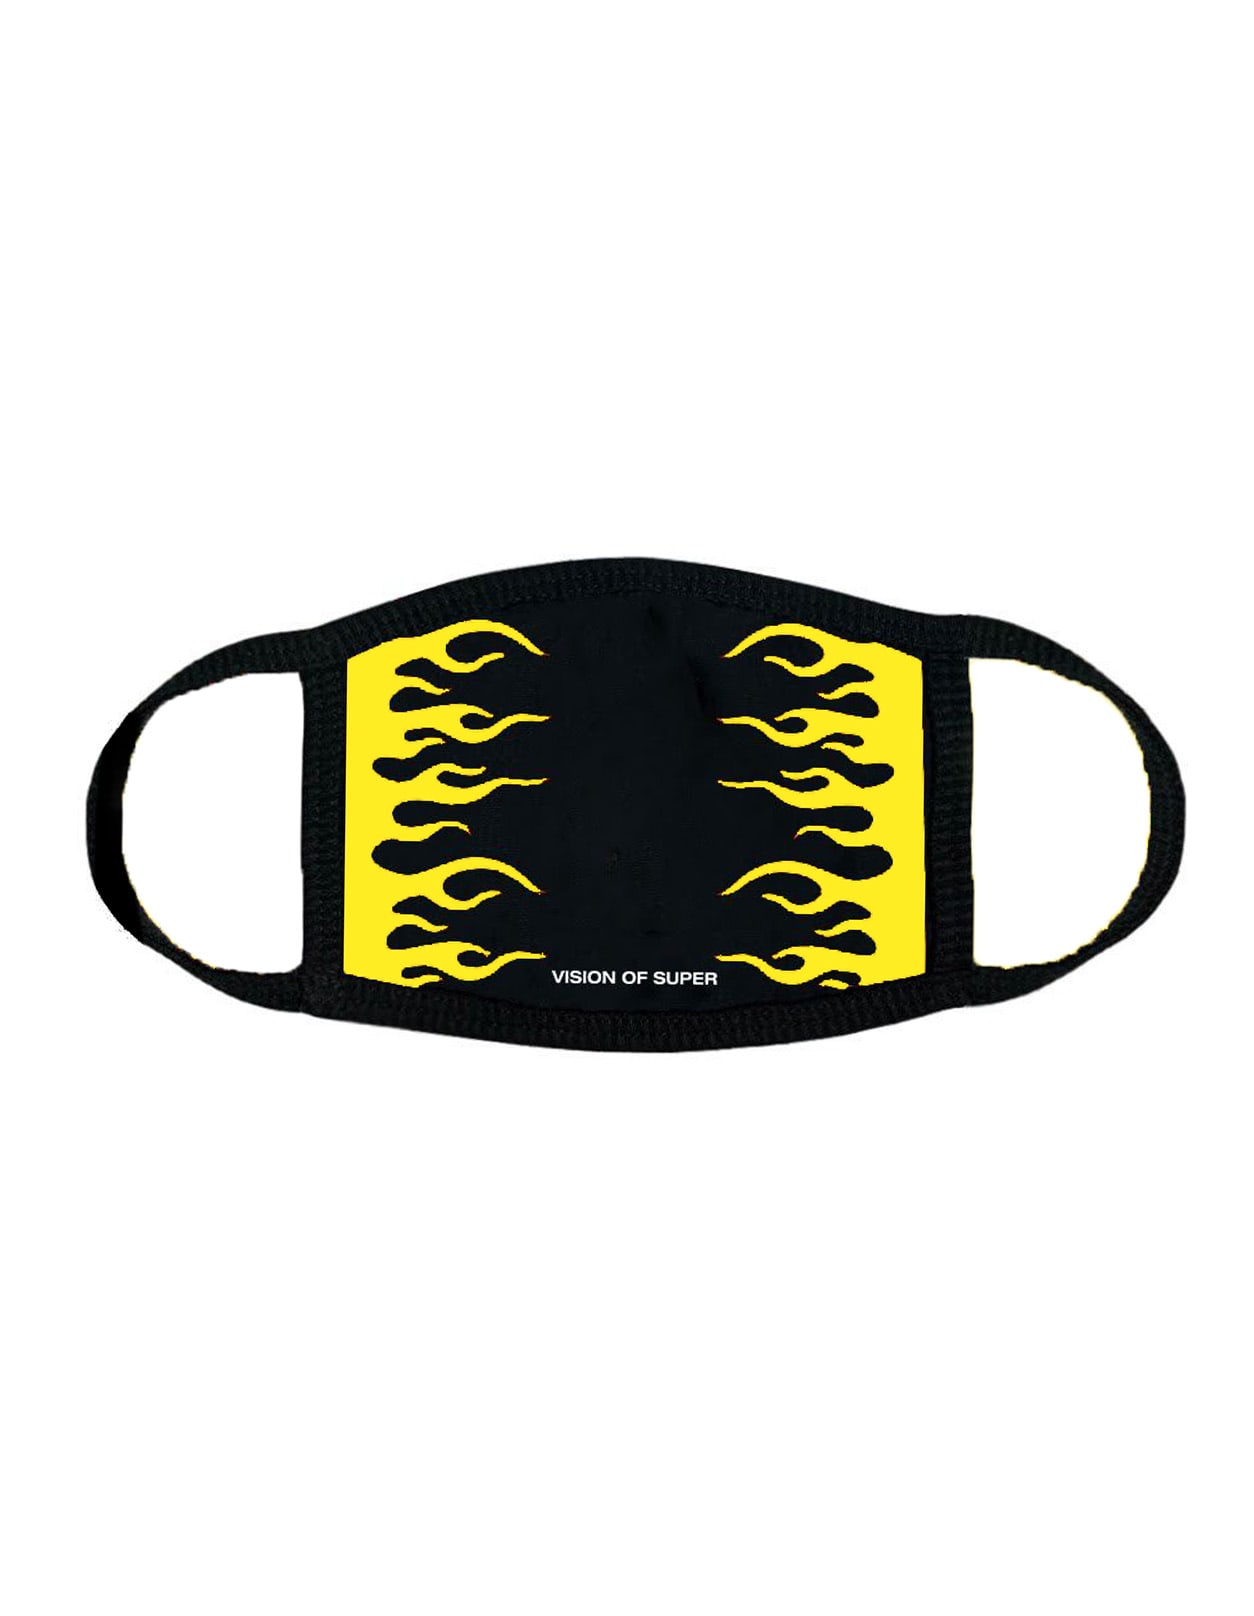 Vision of Super Black And Yellow Flames Face Mask